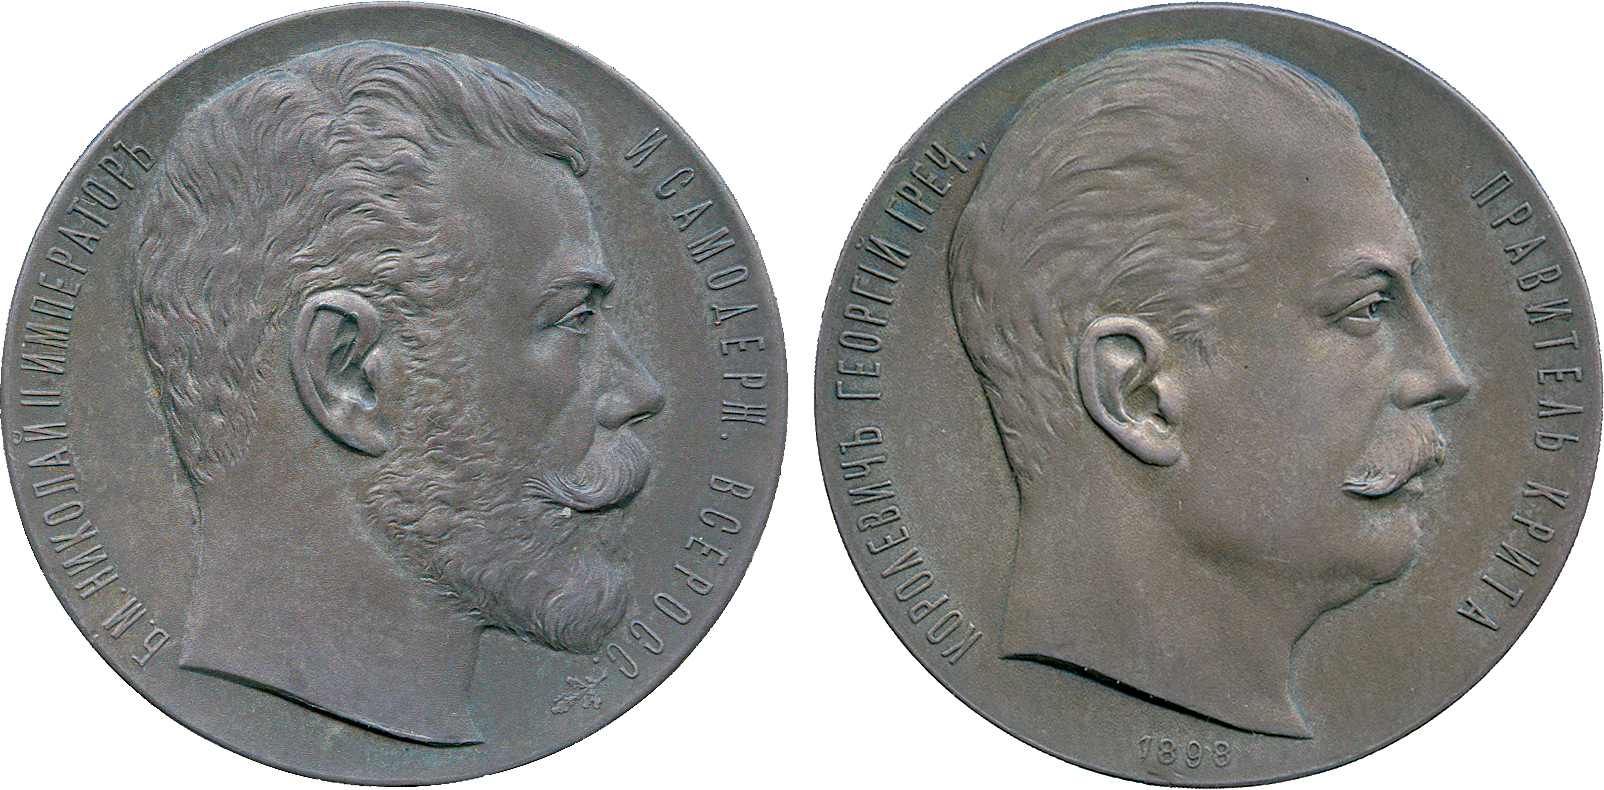 WORLD COMMEMORATIVE MEDALS, Art Medals, Greece, Crete, Prince George of Greece (1869-1957), High